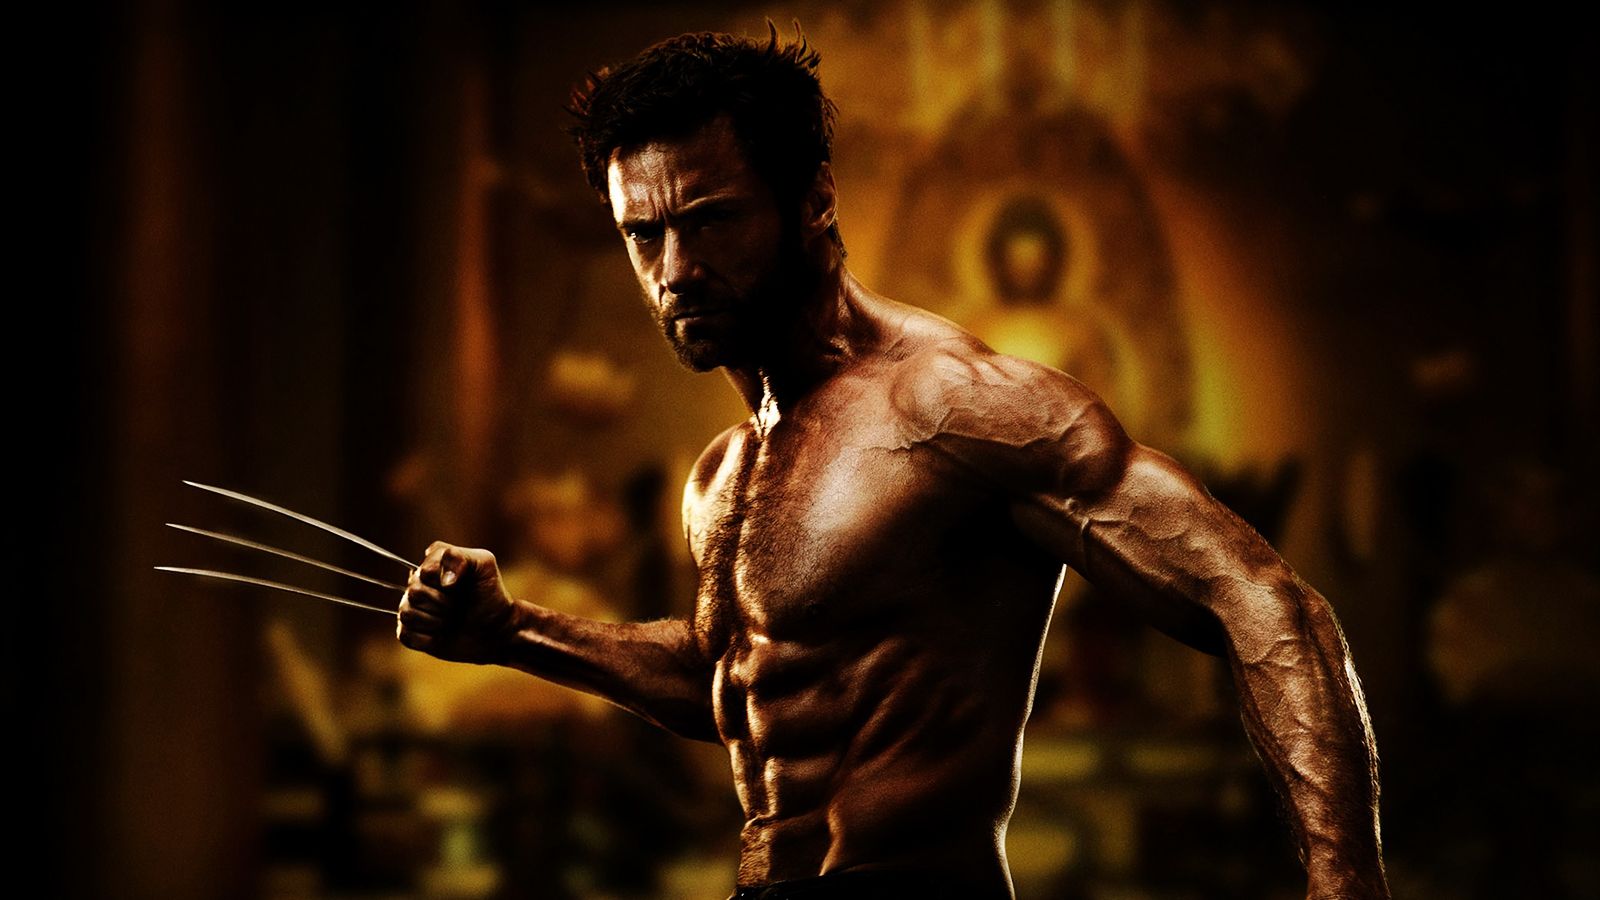 Wolverine Wallpapers - HD Wallpapers Backgrounds of Your Choice